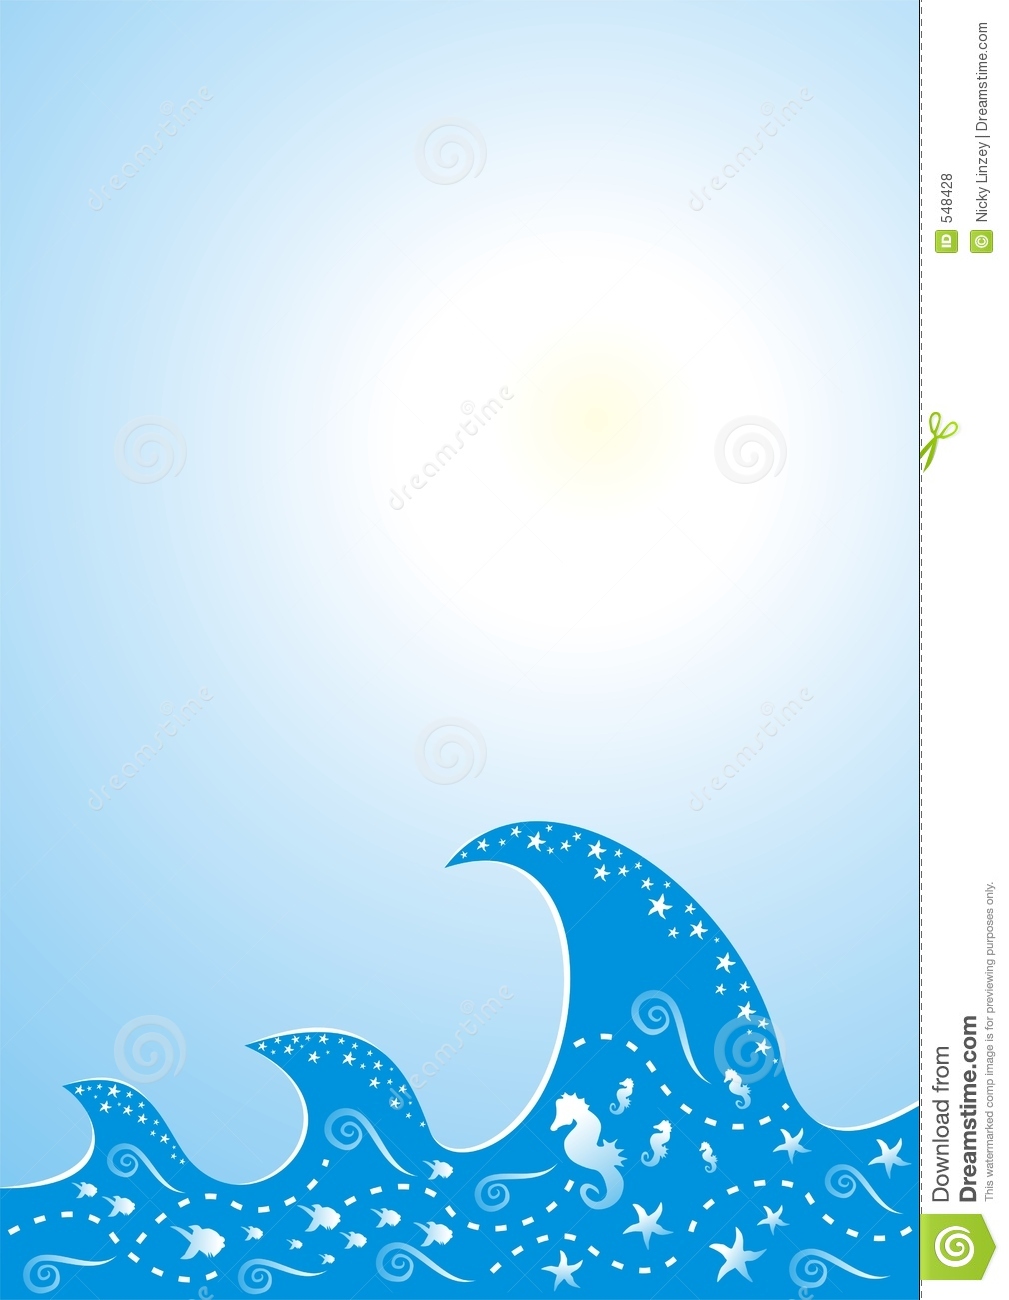 Free Download Underwater Border Clipart Images Pictures Becuo 1009x1300 For Your Desktop Mobile Tablet Explore 46 Under The Sea Wallpaper Border Under The Sea Wallpaper Sea World Wallpaper Borders